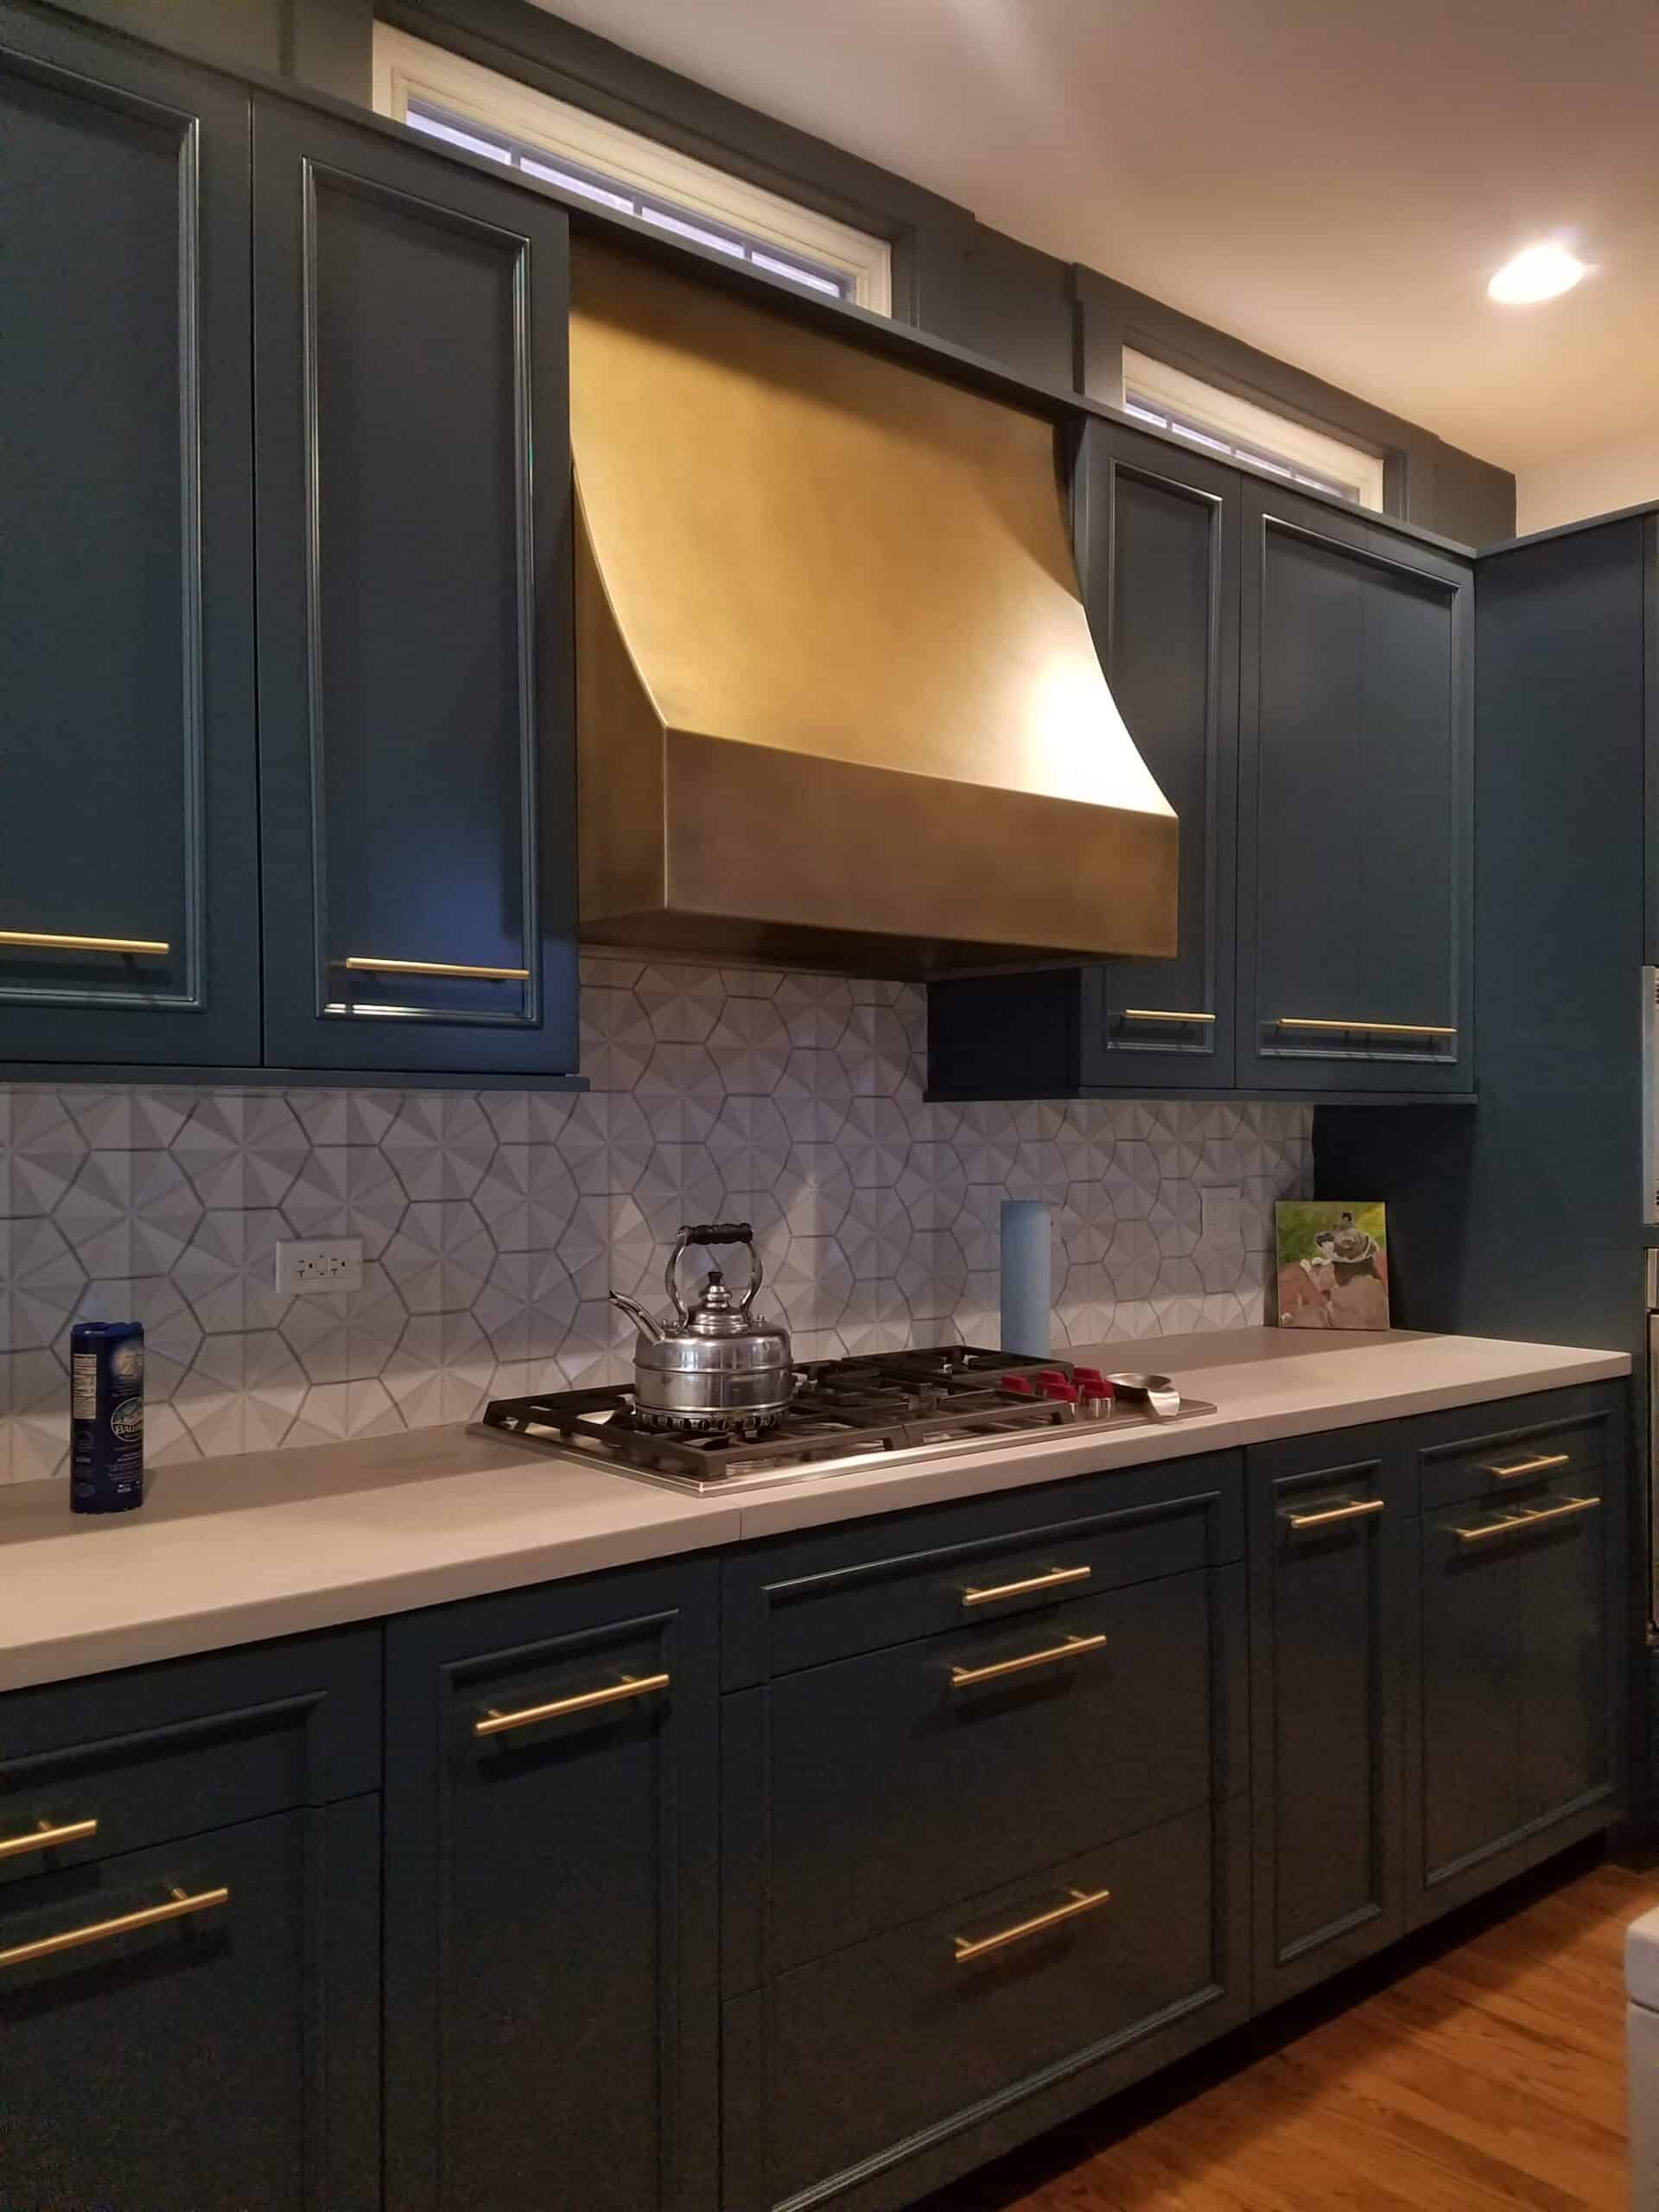 Sideview of a kitchen with dark blue cupboards and gold accents